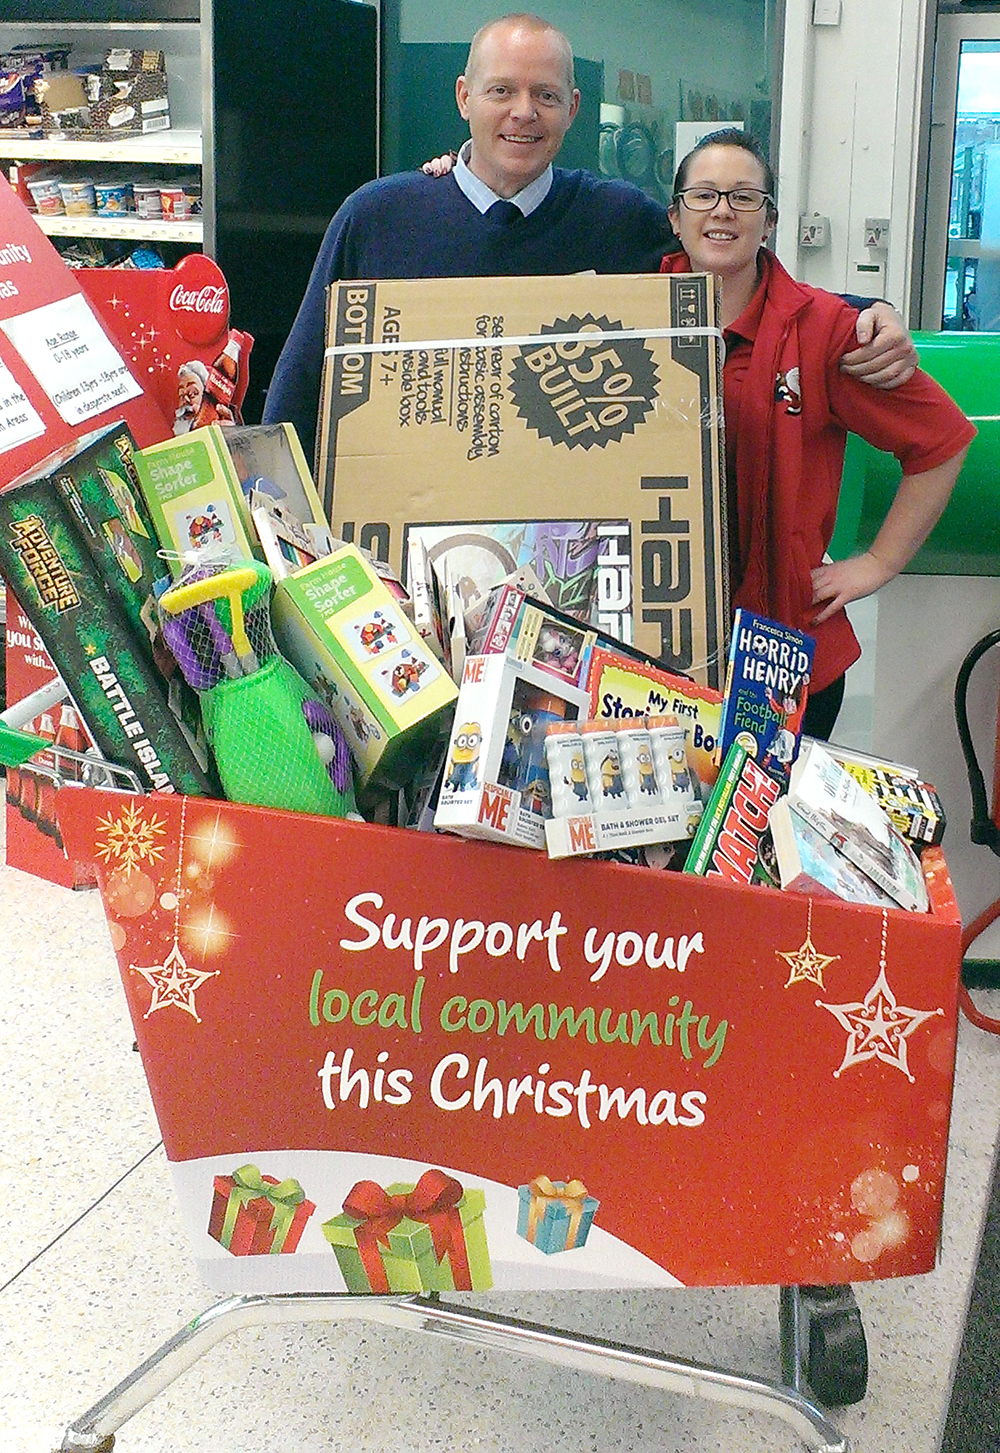 ASDA Donates to Helping Hands Appeal